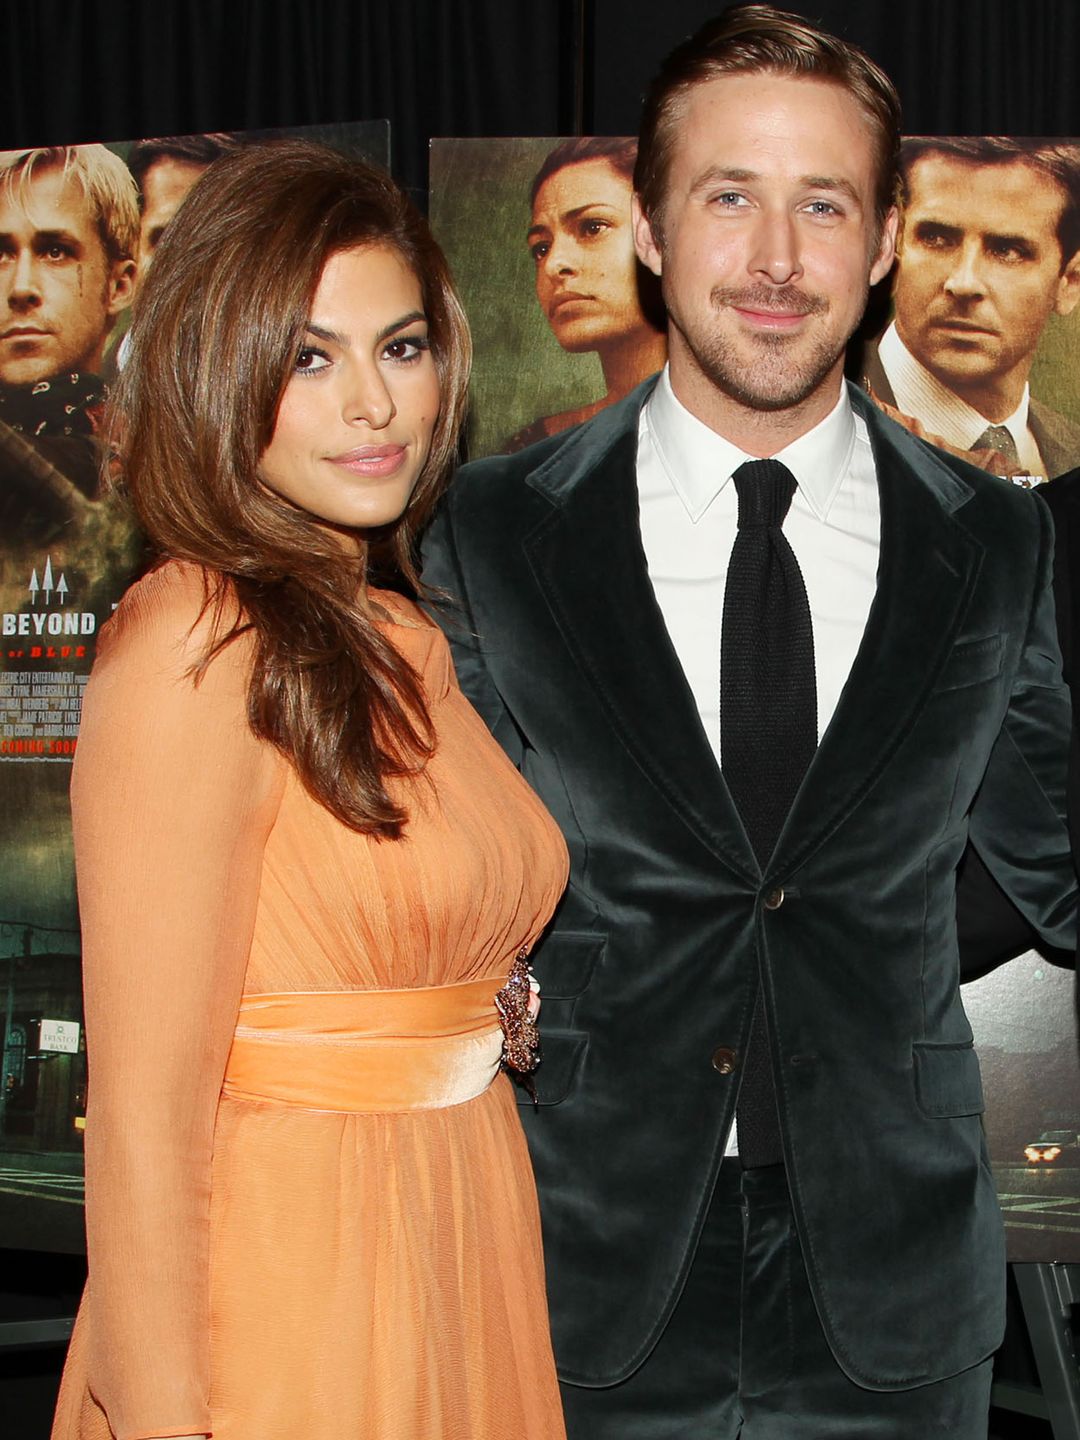 Eva Mendes, Ryan Gosling at 'The Place Beyond the Pines' film premiere, New York, America - 28 Mar 2013